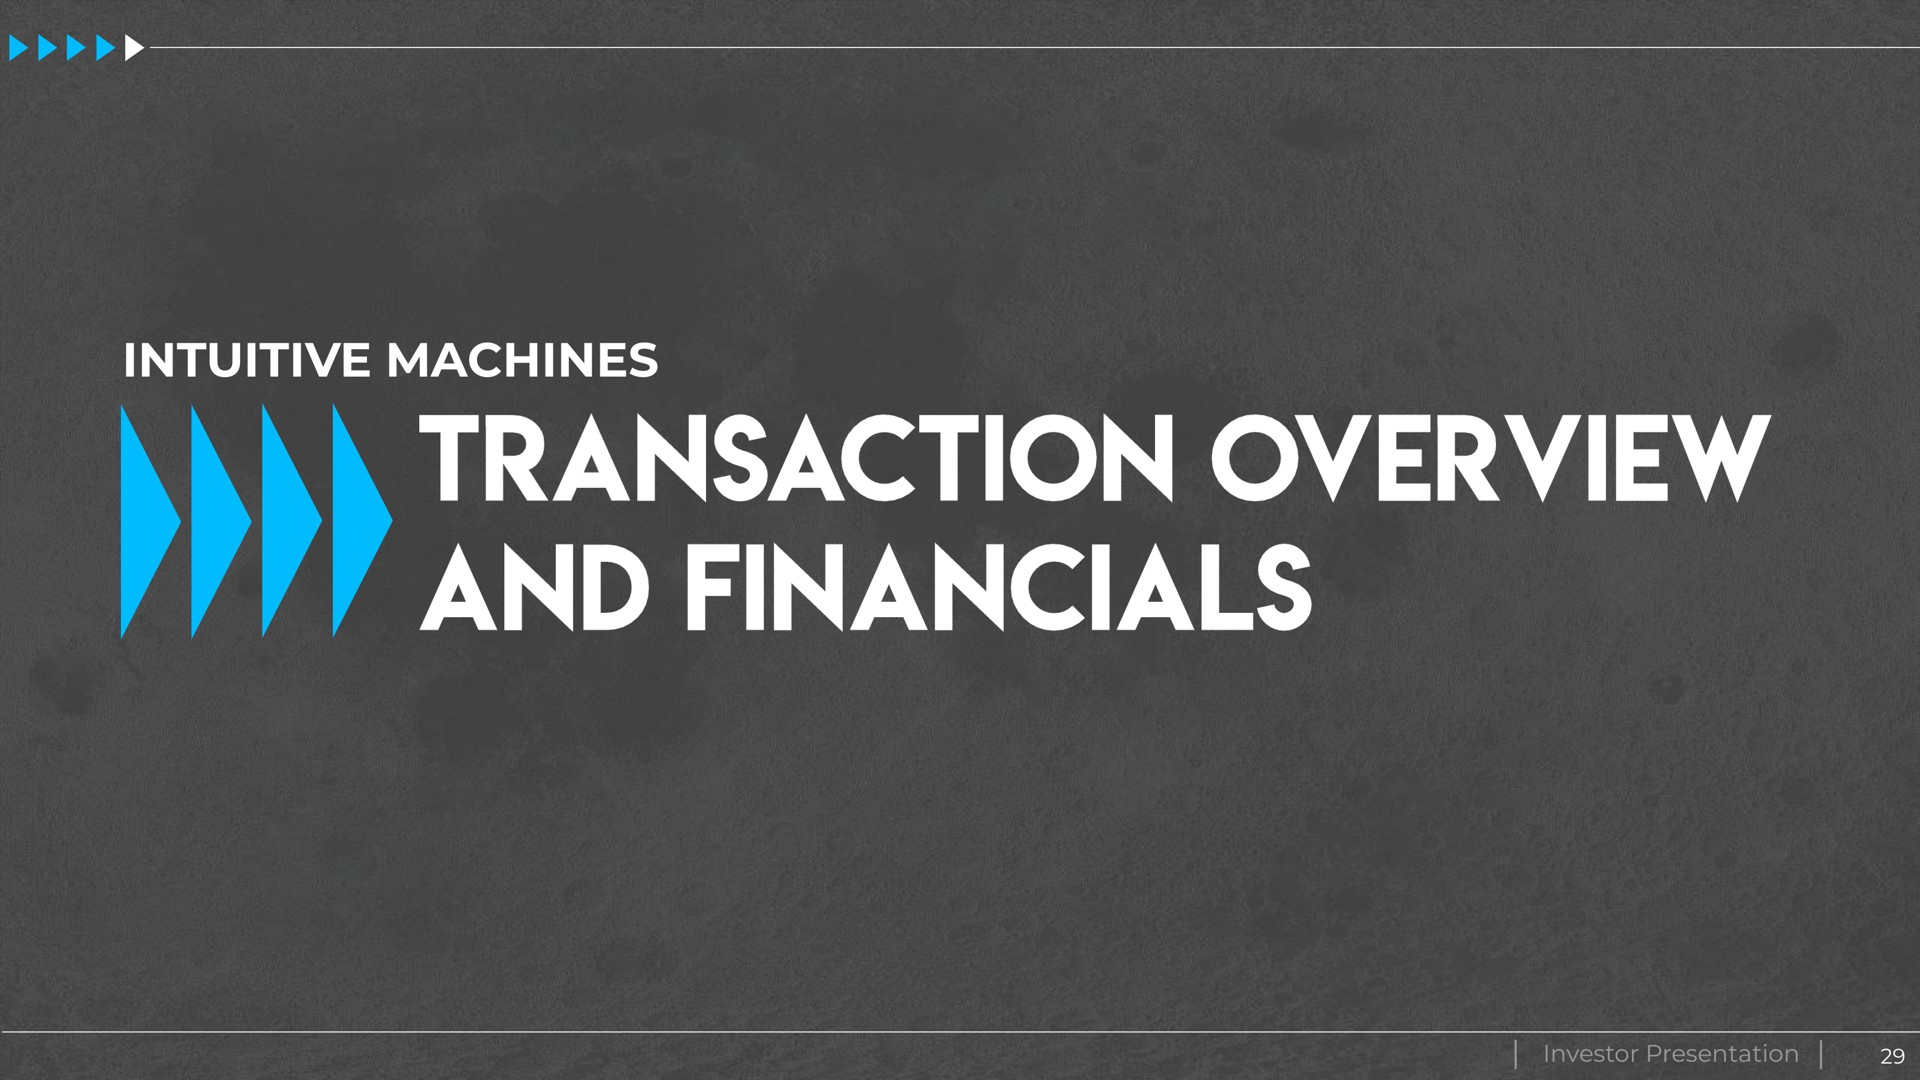 intuitive machines investor presentation transaction overview | Intuitive Machines